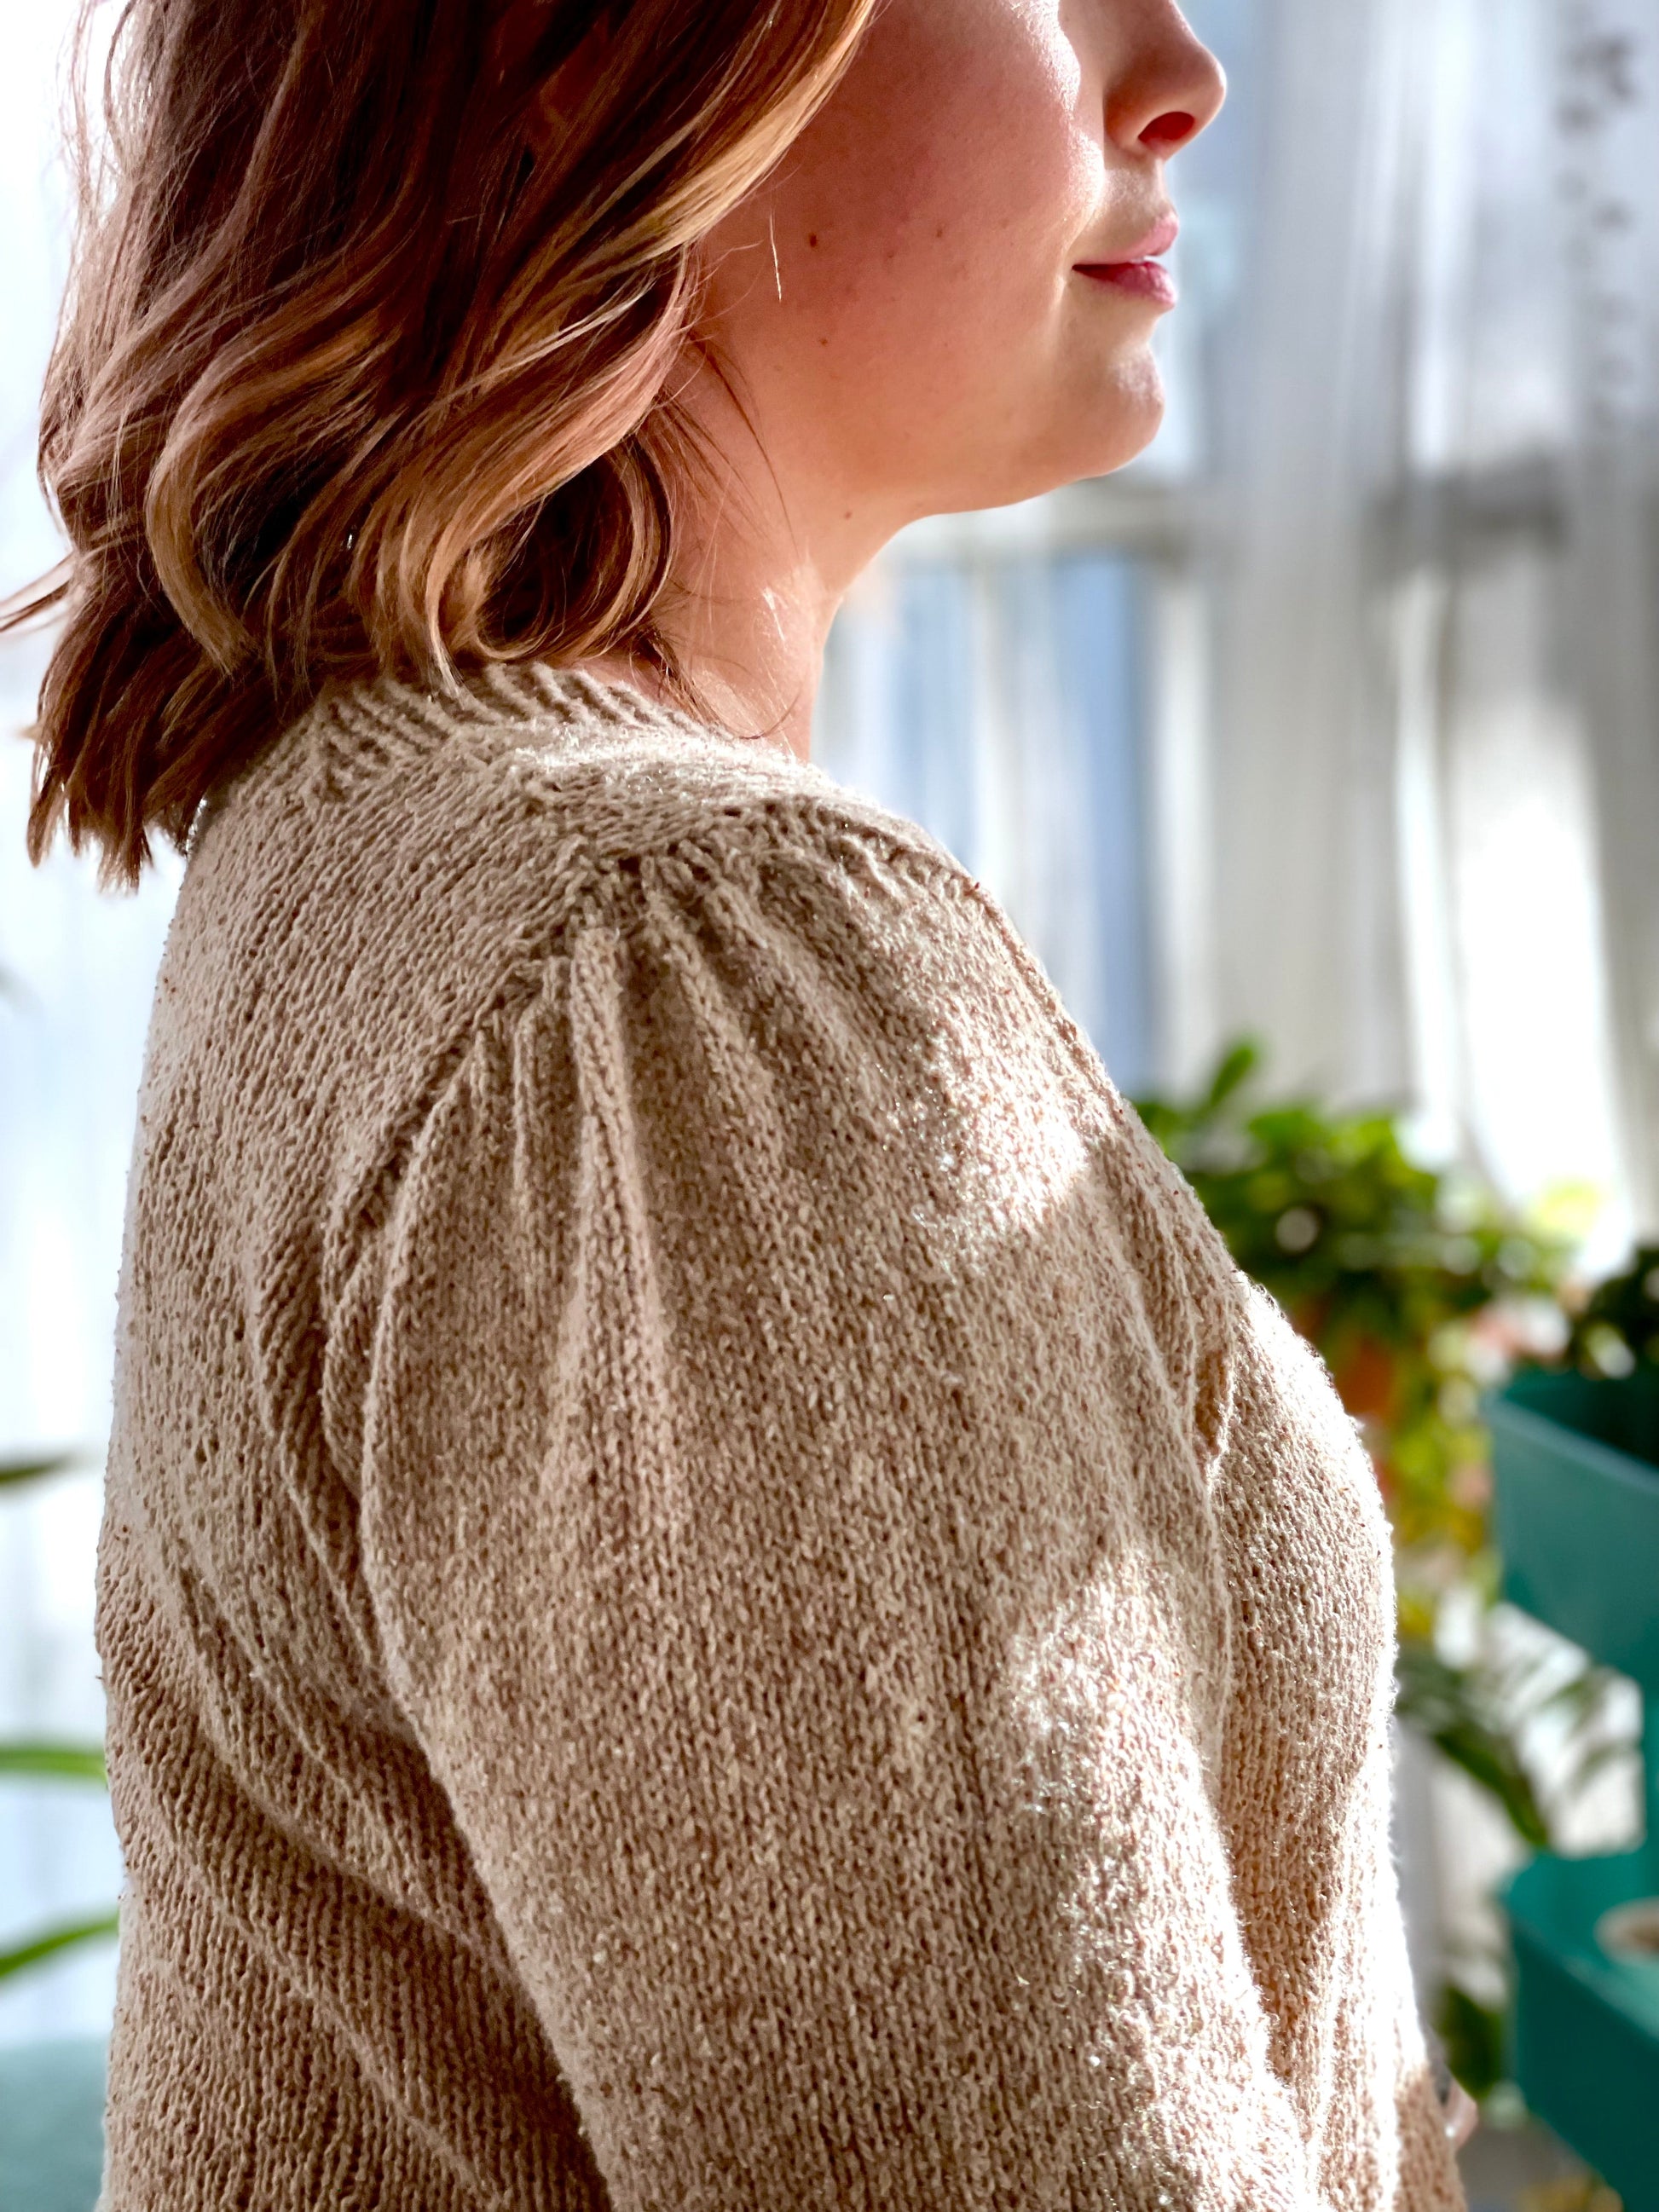 Bess, seen from the side, wears a light beige knit sweater - the Hypatia pullover. The sleeves feature a gathered seamed, creating pleats at the shoulder and upper arm.